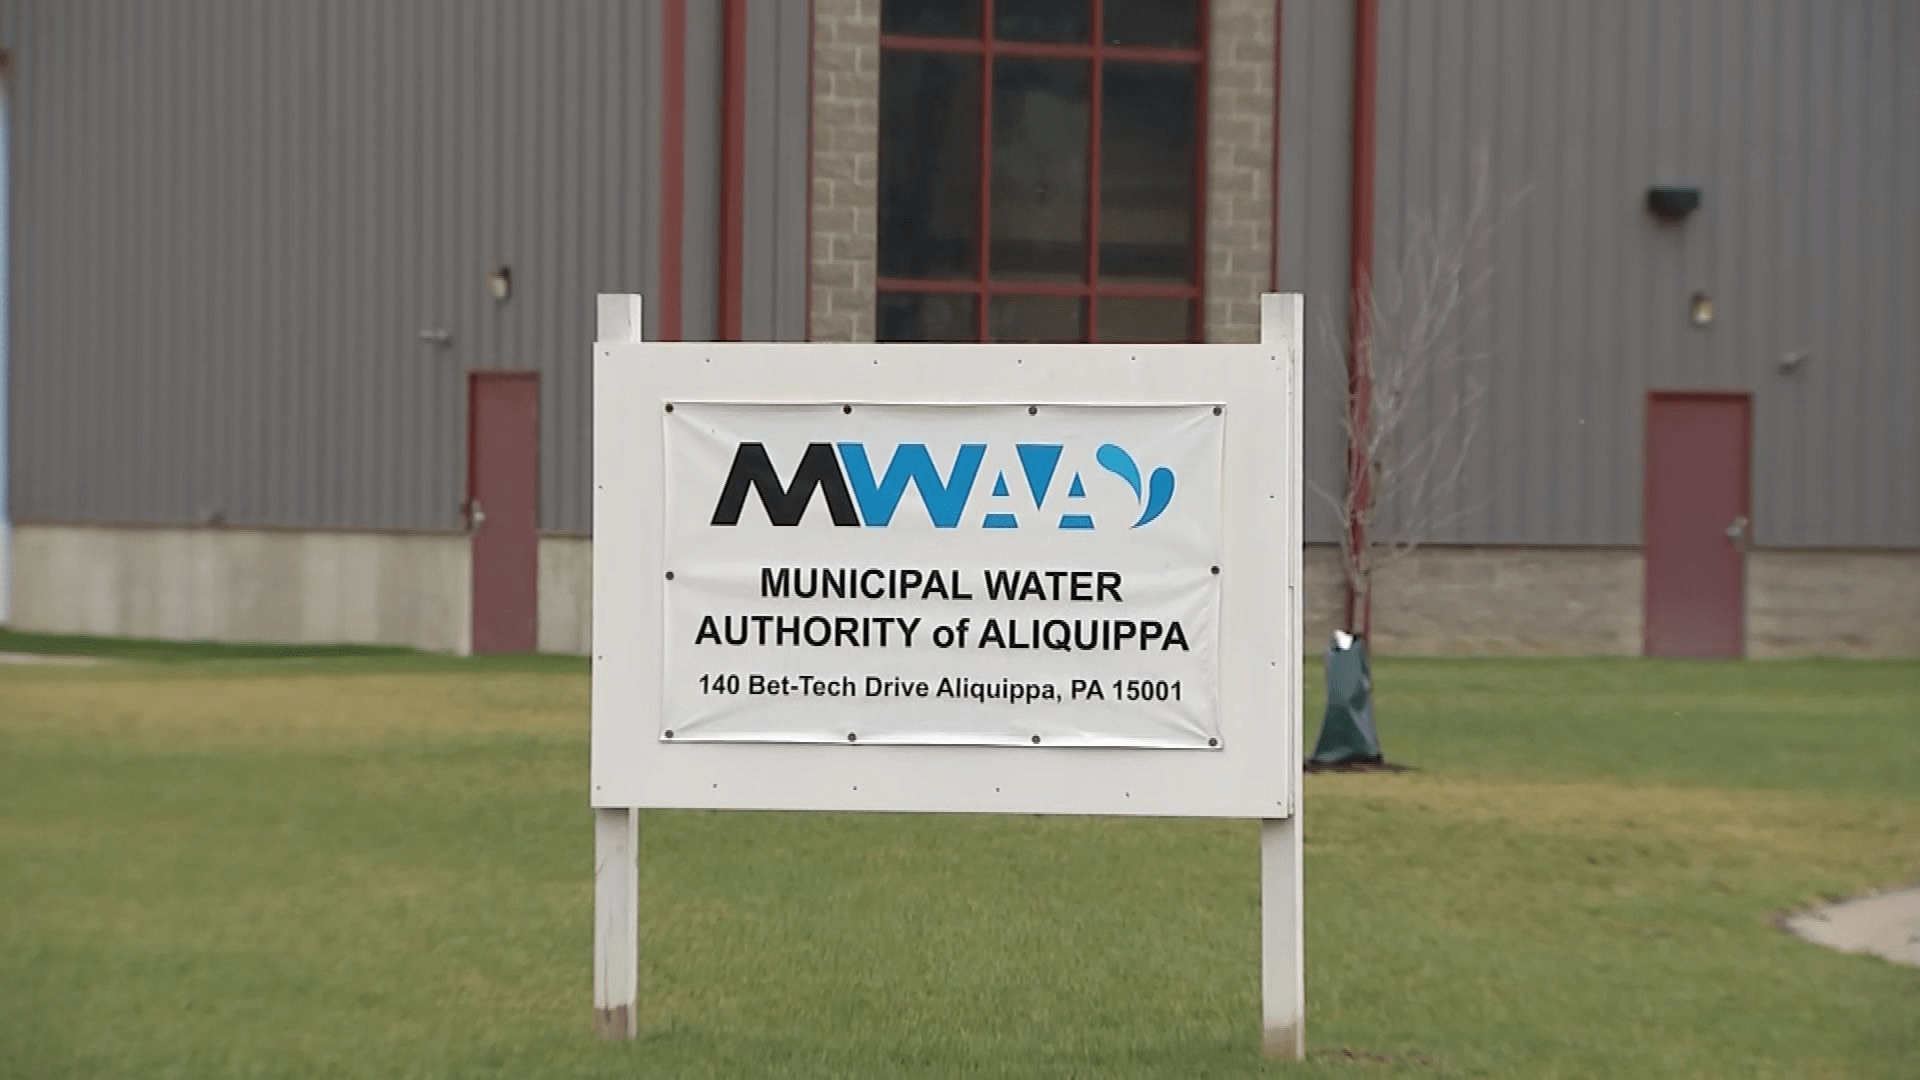 National cyber security agency sends out warning after Municipal Water Authority of Aliquippa hacked – WPXI